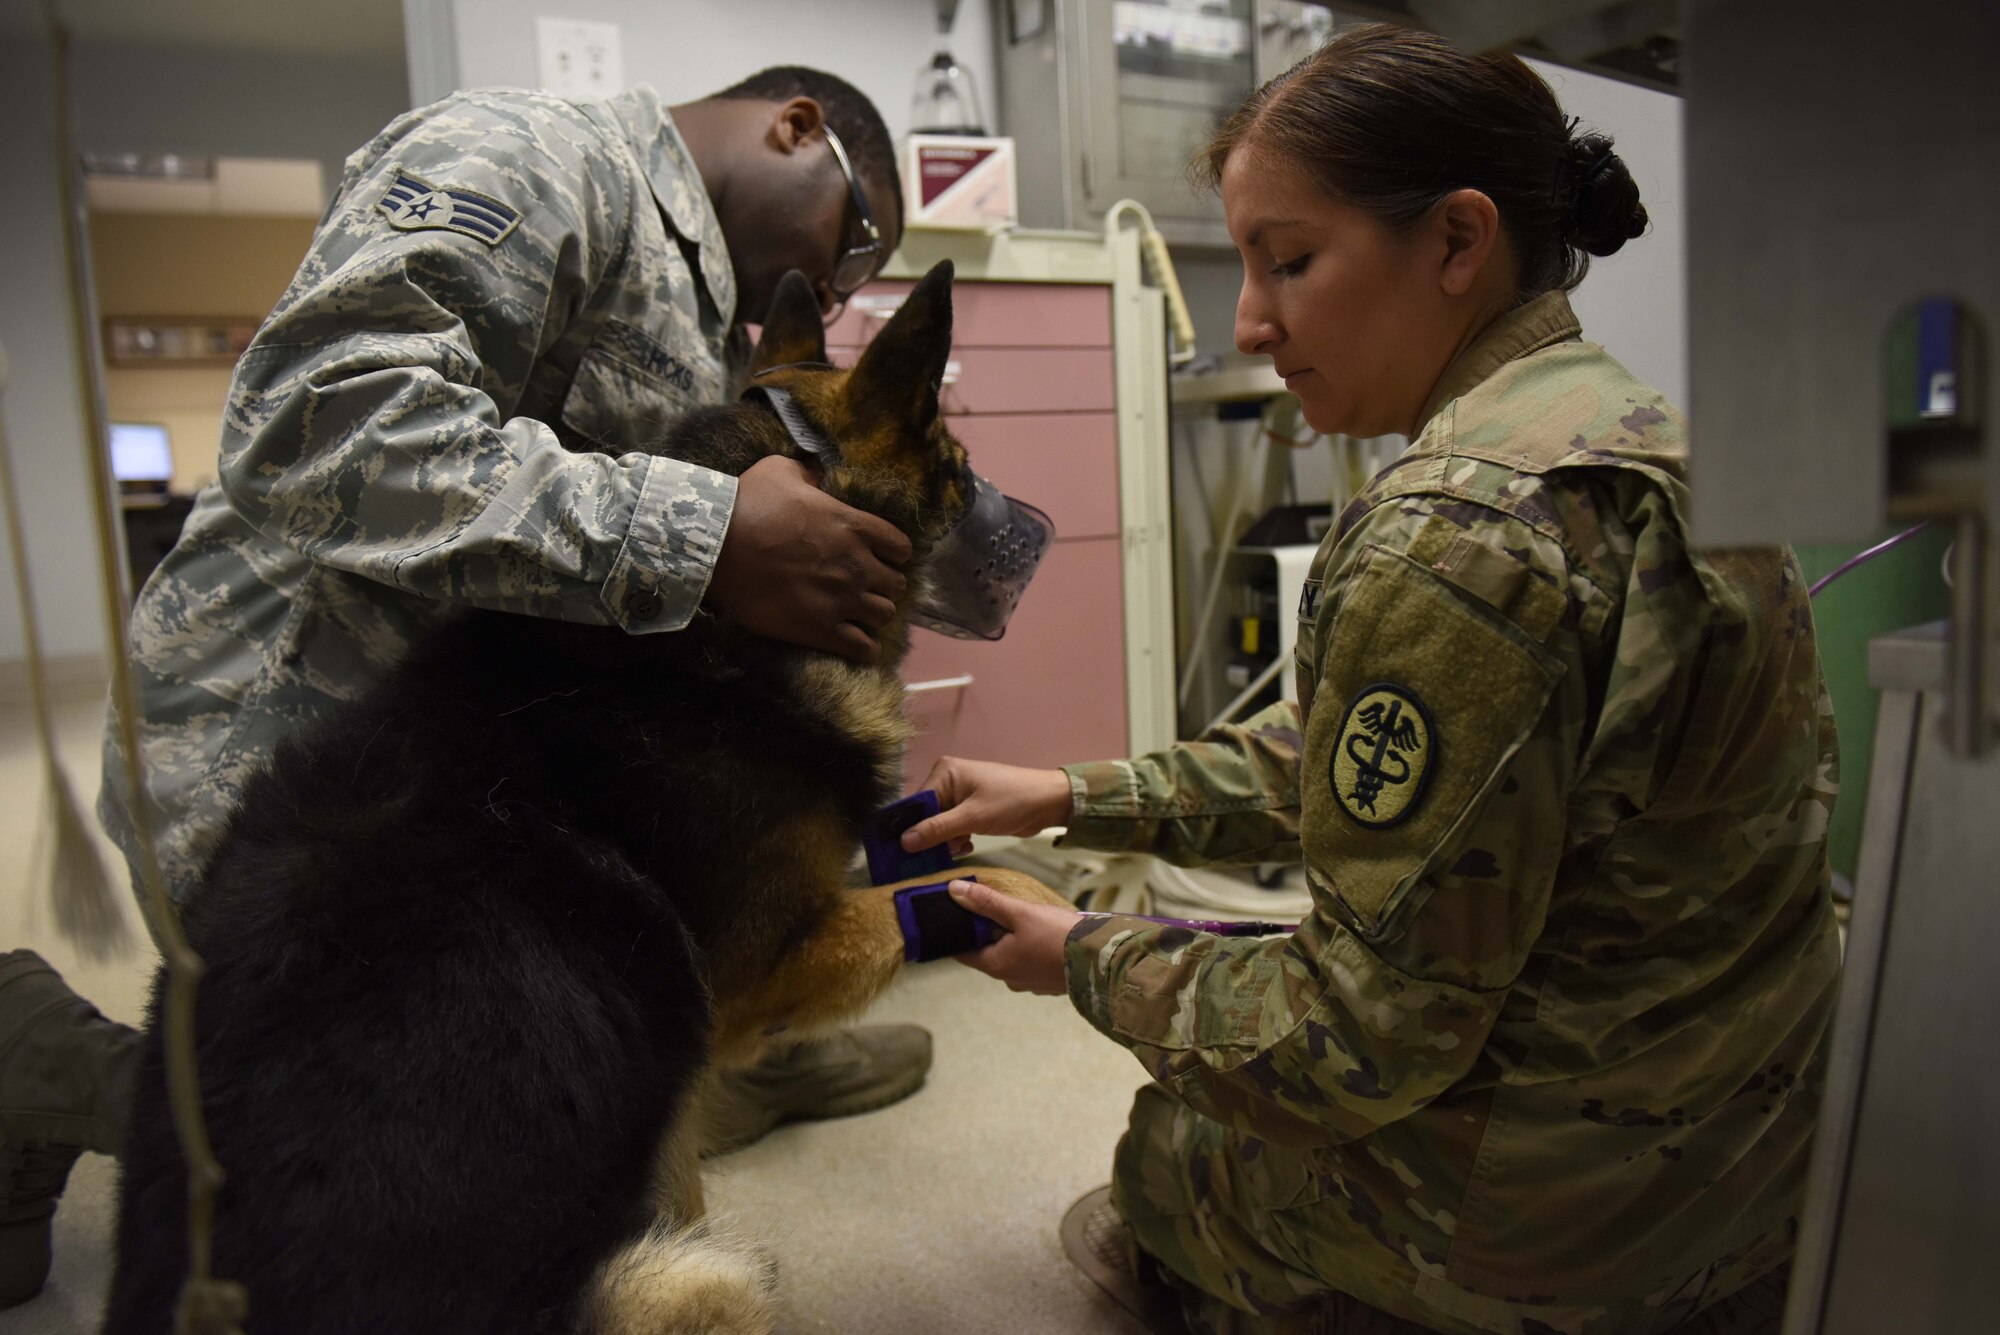 U.S. Army Capt. Sarah Merriday, Public Health Activity Veterinary Corps officer, left, secures a blood pressure cuff on Military Working Dog Jeck during a check-up April 17, 2017, at the Little Rock Air Force Base Veterinary Treatment Facility on Little Rock AFB, Ark. The facility’s personnel are the primary care providers for the MWDs on base. (U.S. Air Force photo by Senior Airman Mercedes Taylor)